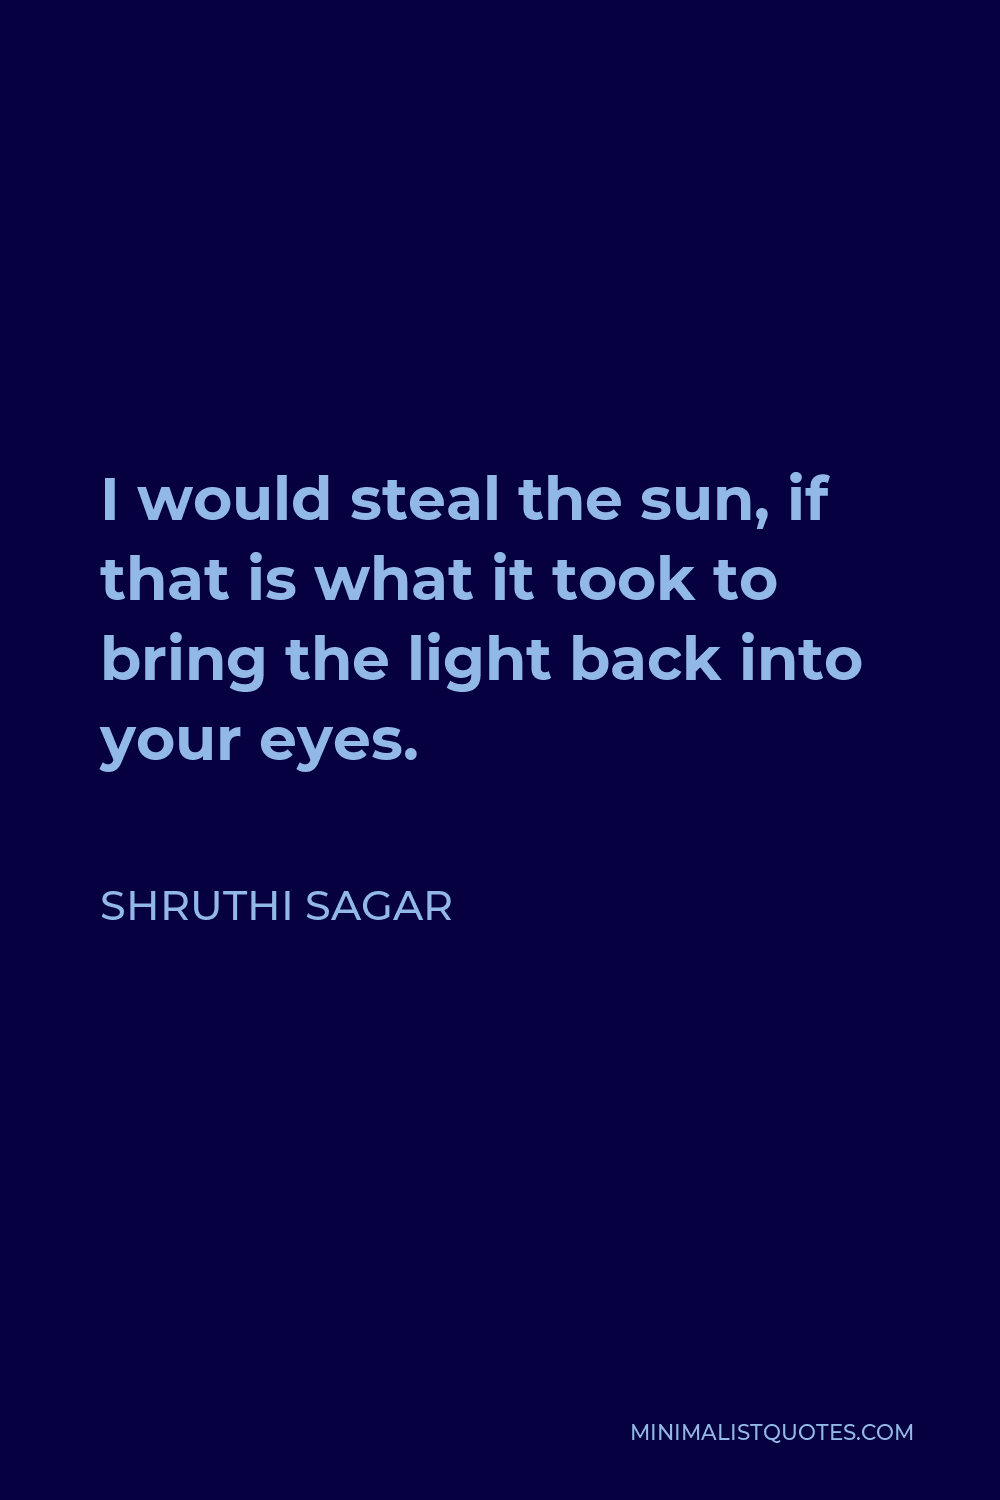 Shruthi Sagar Quote - I would steal the sun, if that is what it took to bring the light back into your eyes.